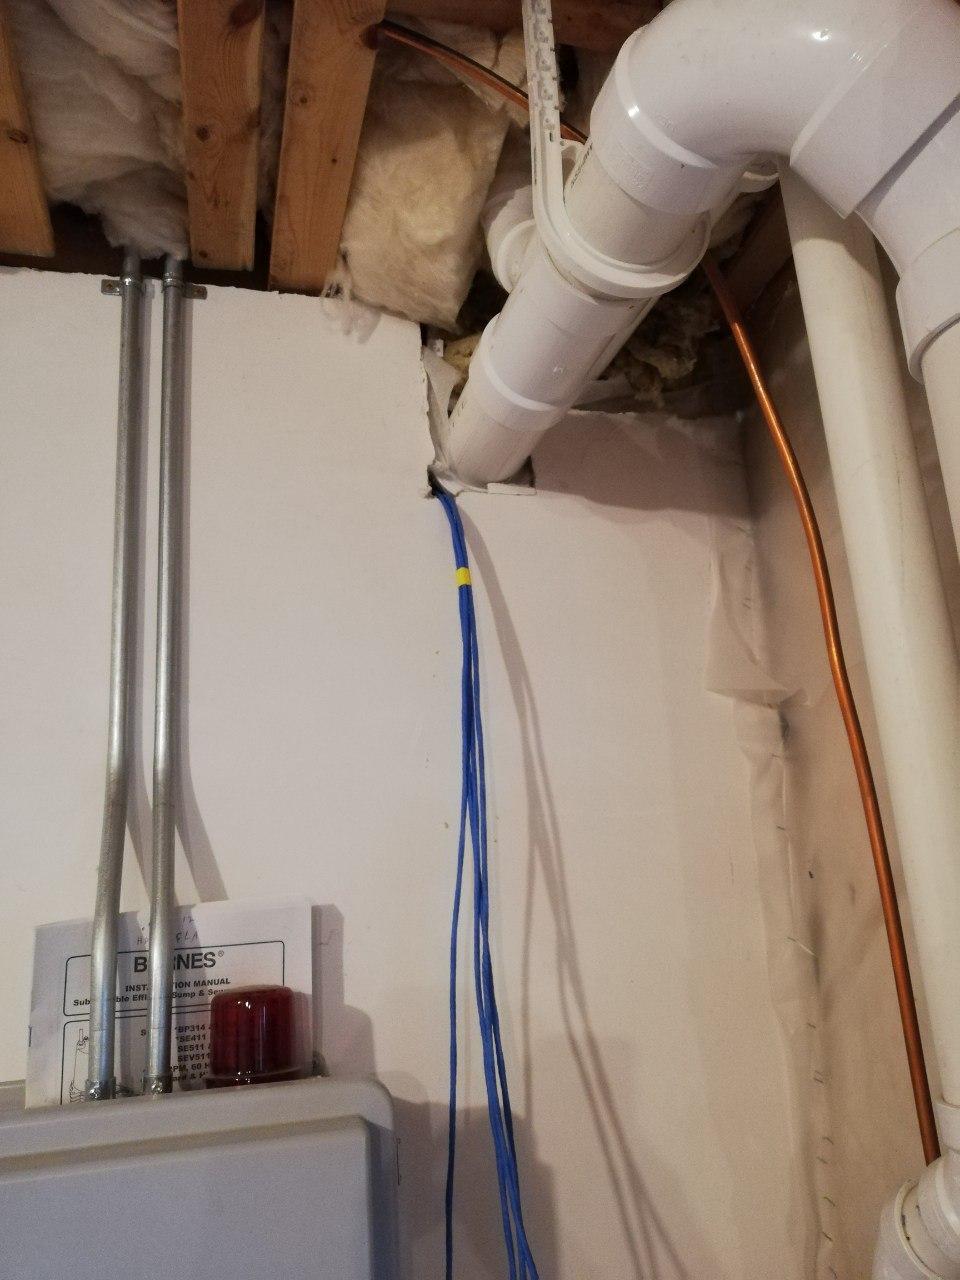 New wire coming from bulkhead in garage, and into basement.